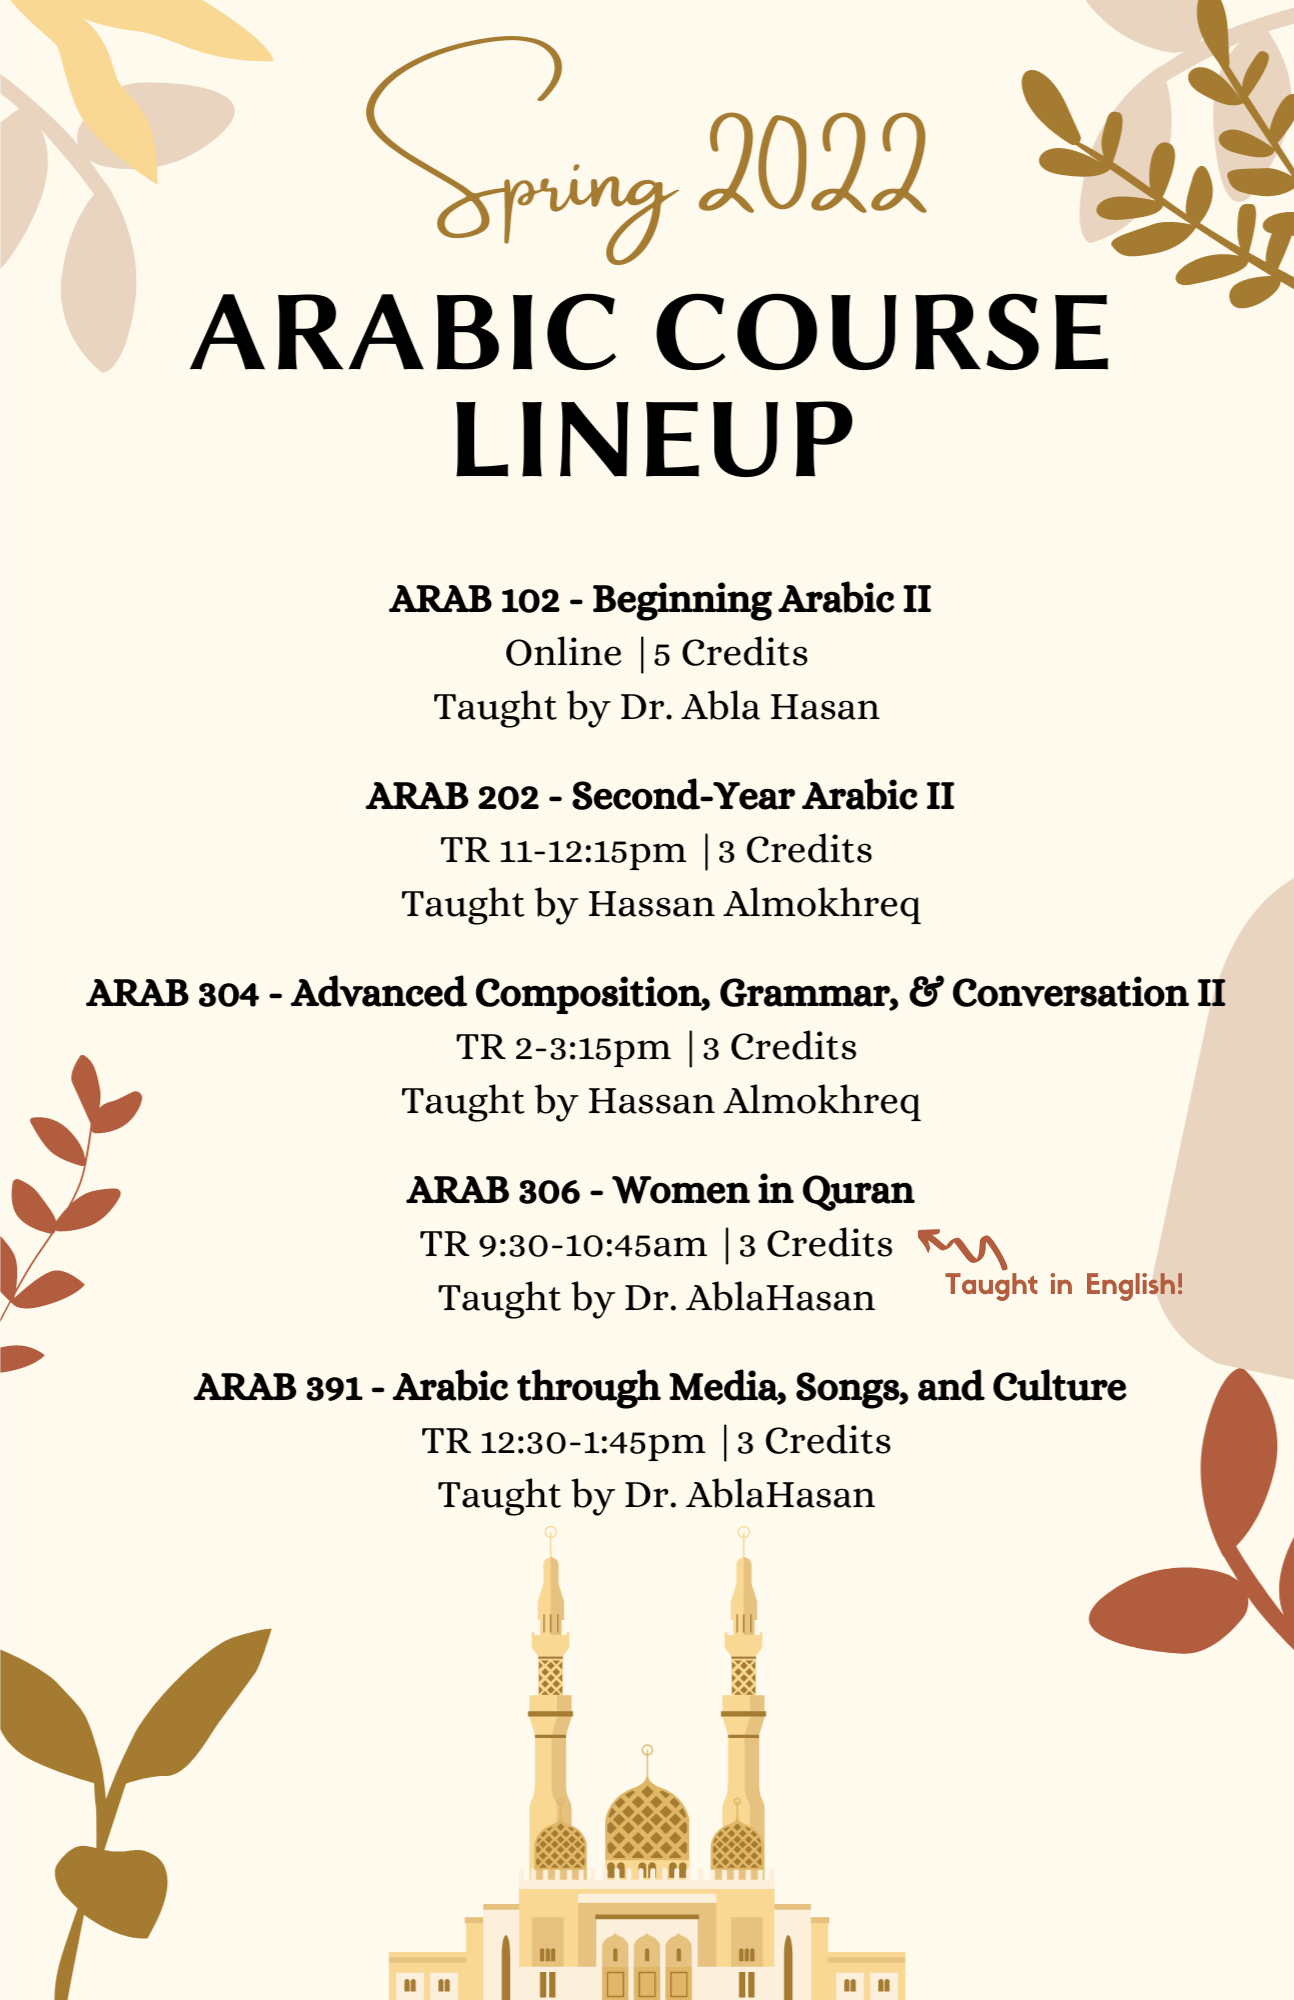 Spring 2022 Arabic Course Lineup